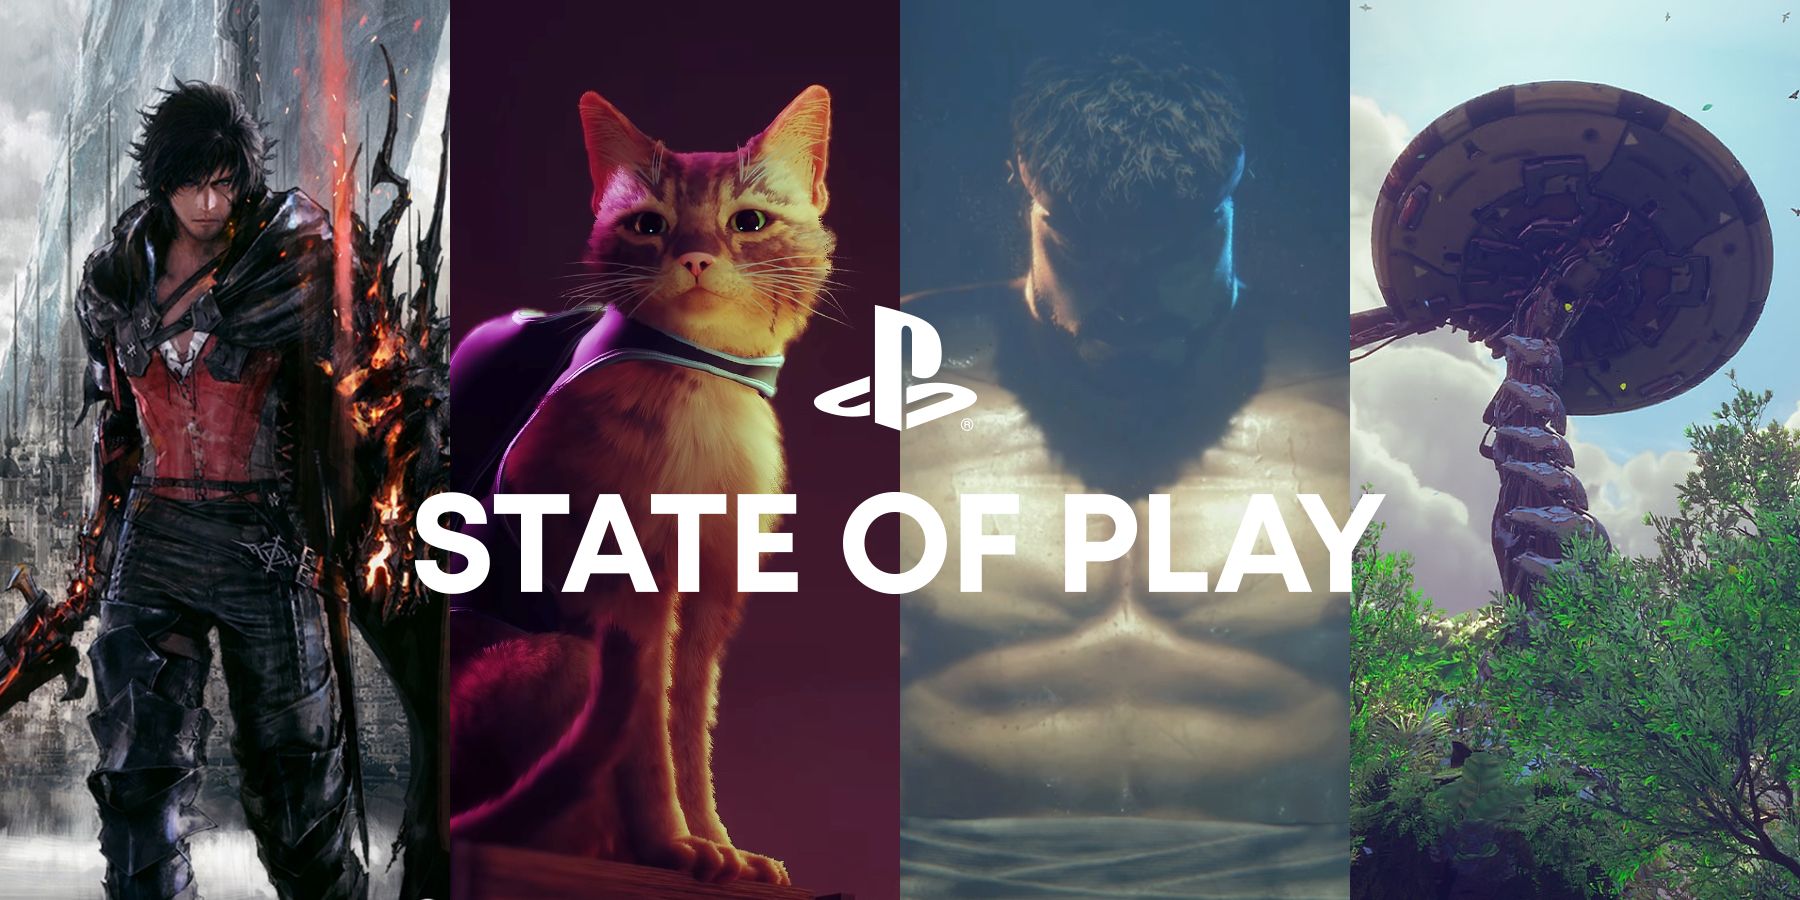 All Games Showcased at State of Play June 2022